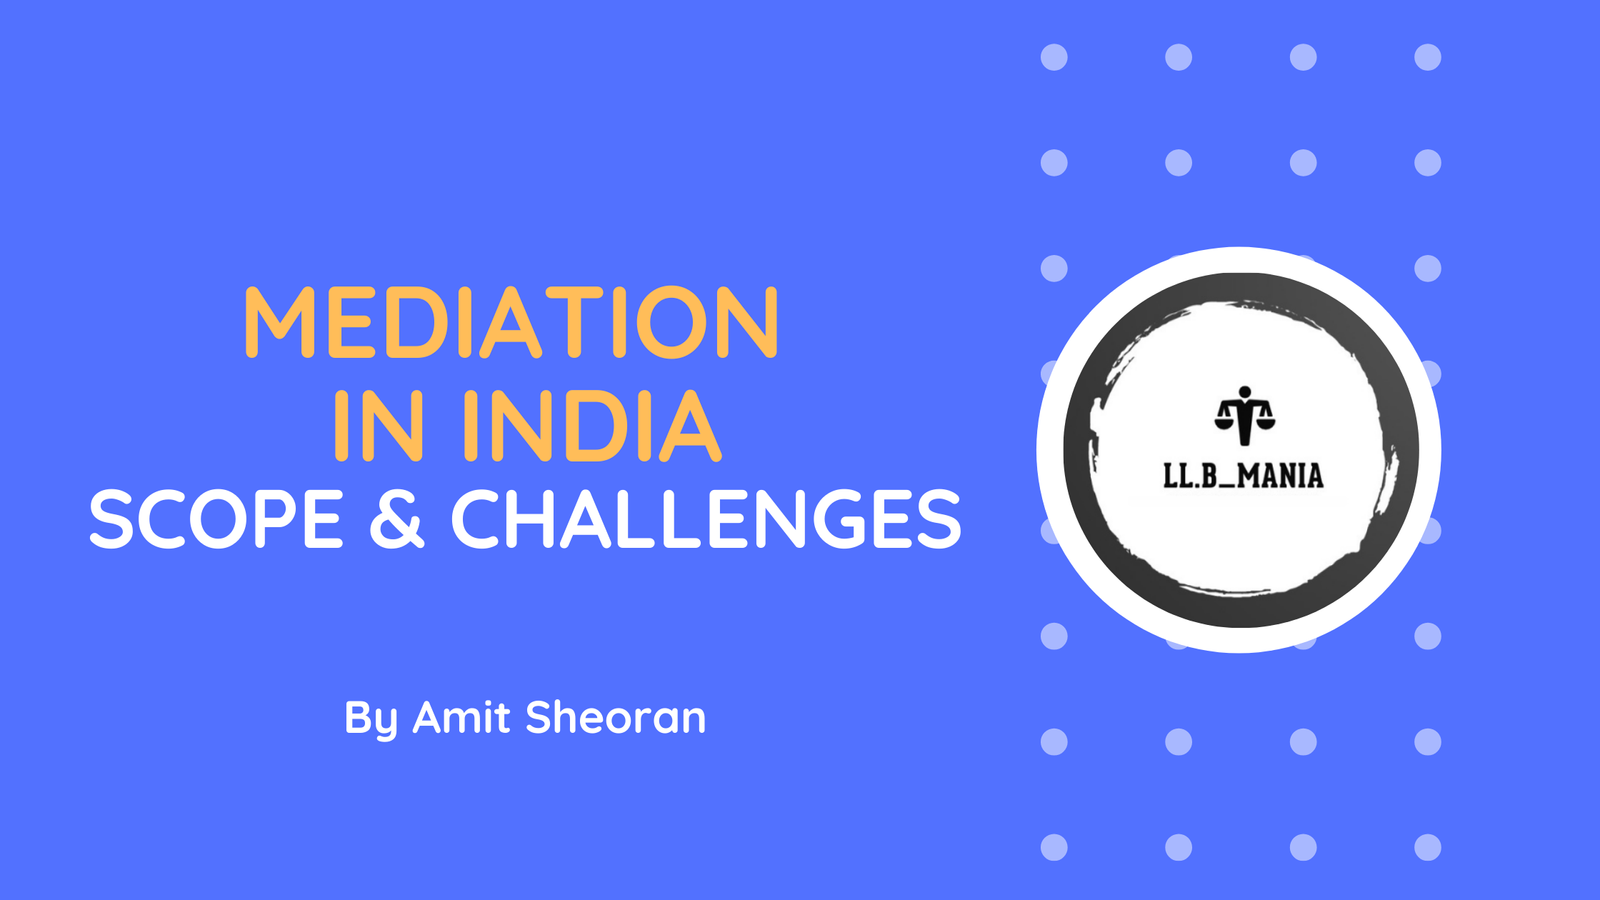 Mediation in India: Scope & Challenges